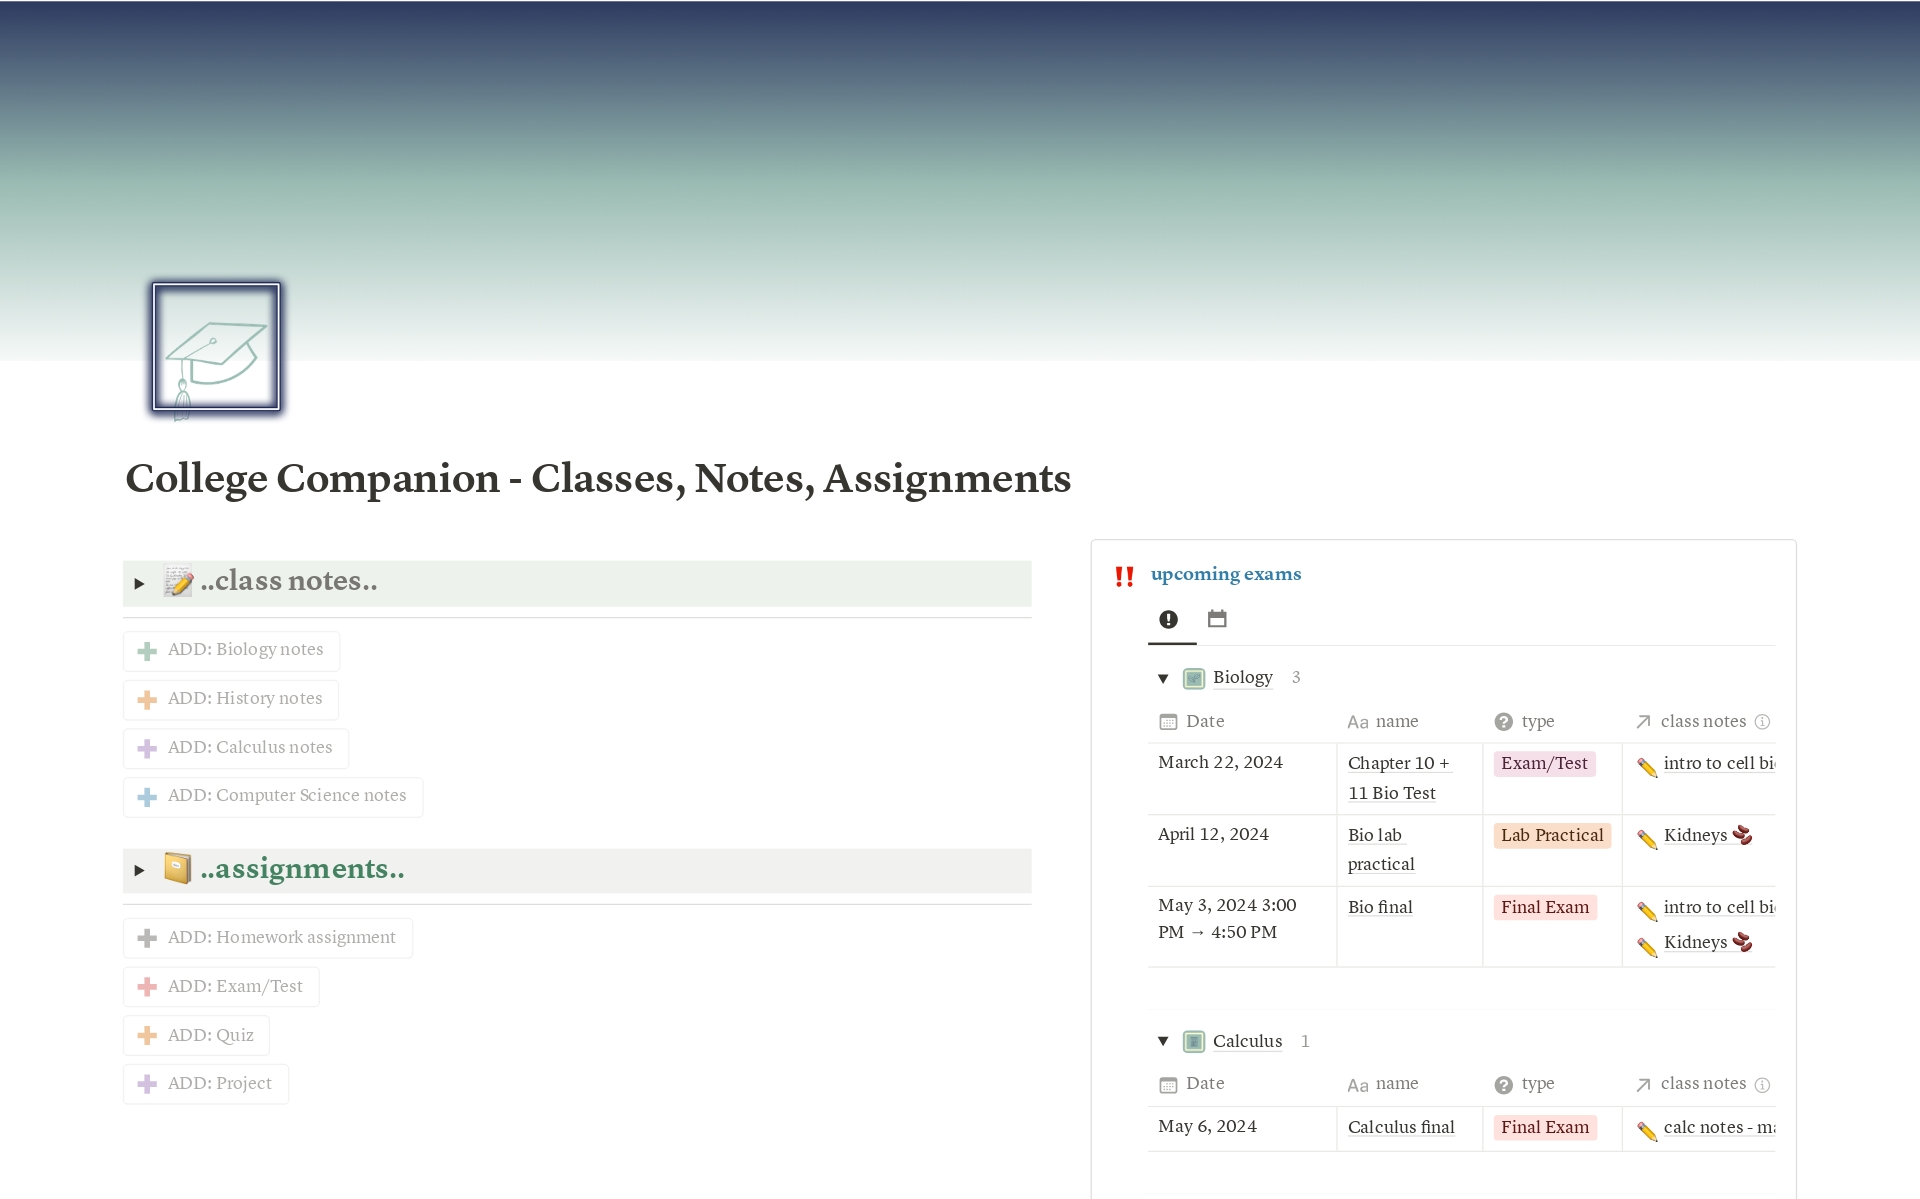 Keep your semester of learning organized with the college companion. The template contains 3 interlinked databases to track homework and assignments, prepare for exams, and keep track of lecture notes.